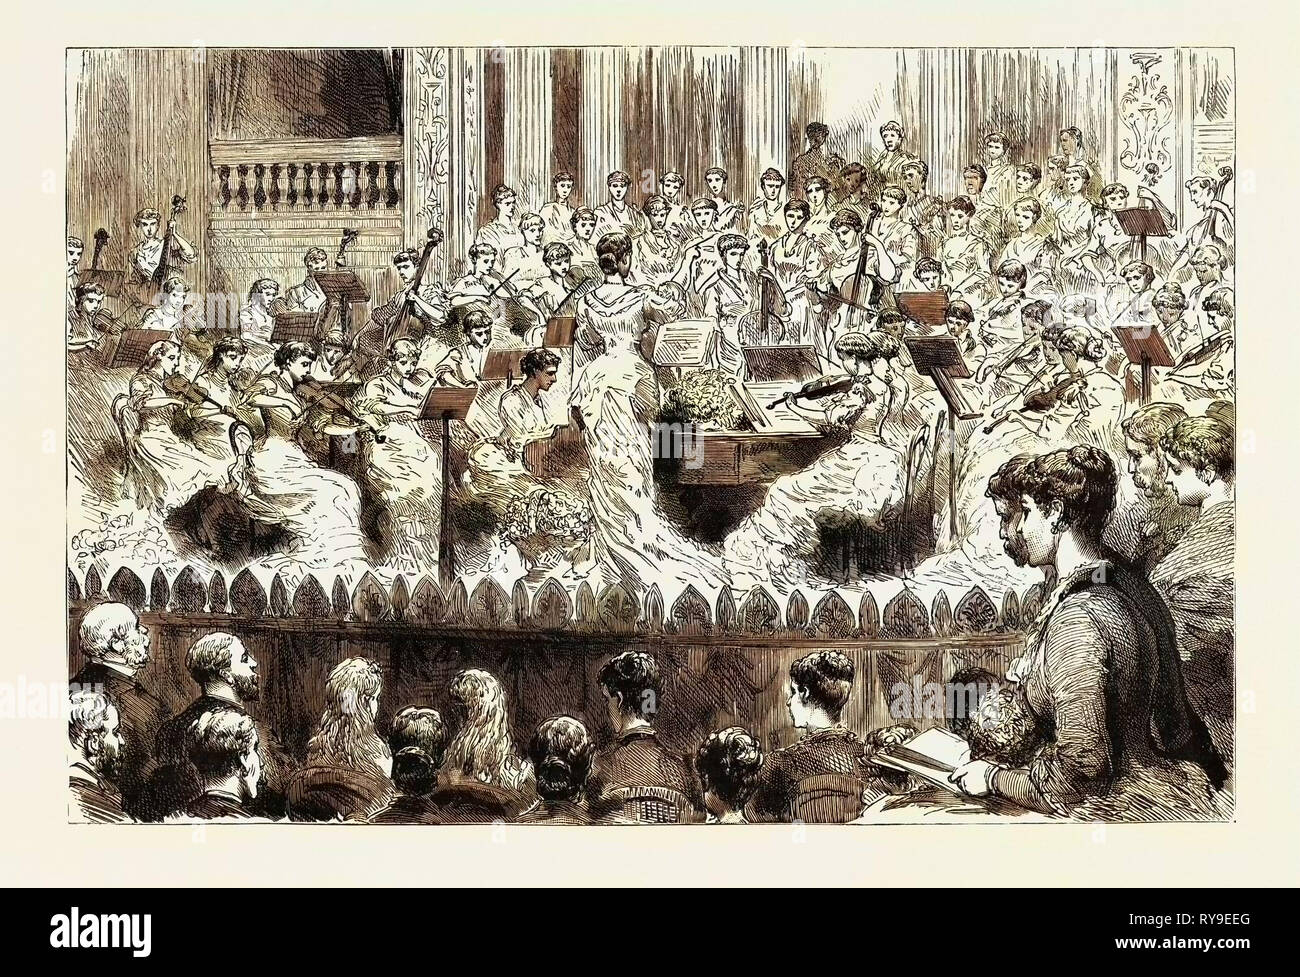 Concert by Viscountess Folkestone's Ladies Orchestra at the Prince's Hall, Piccadilly, Engraving 1884, London, UK, Britain, British, Europe, United Kingdom, Great Britain, European Stock Photo